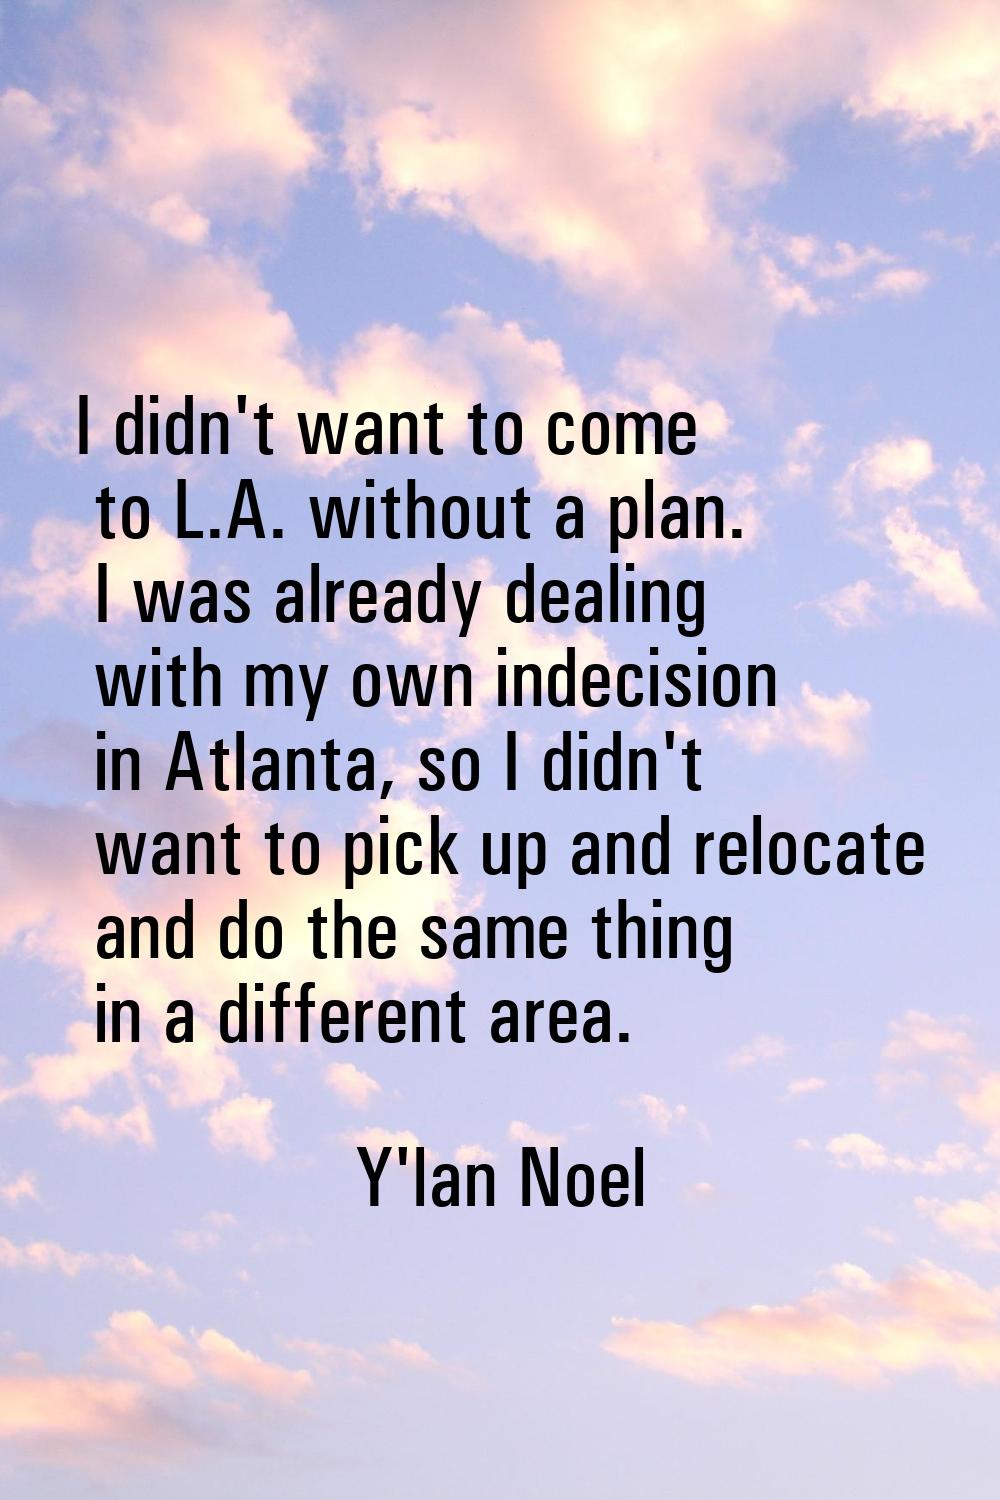 I didn't want to come to L.A. without a plan. I was already dealing with my own indecision in Atlan